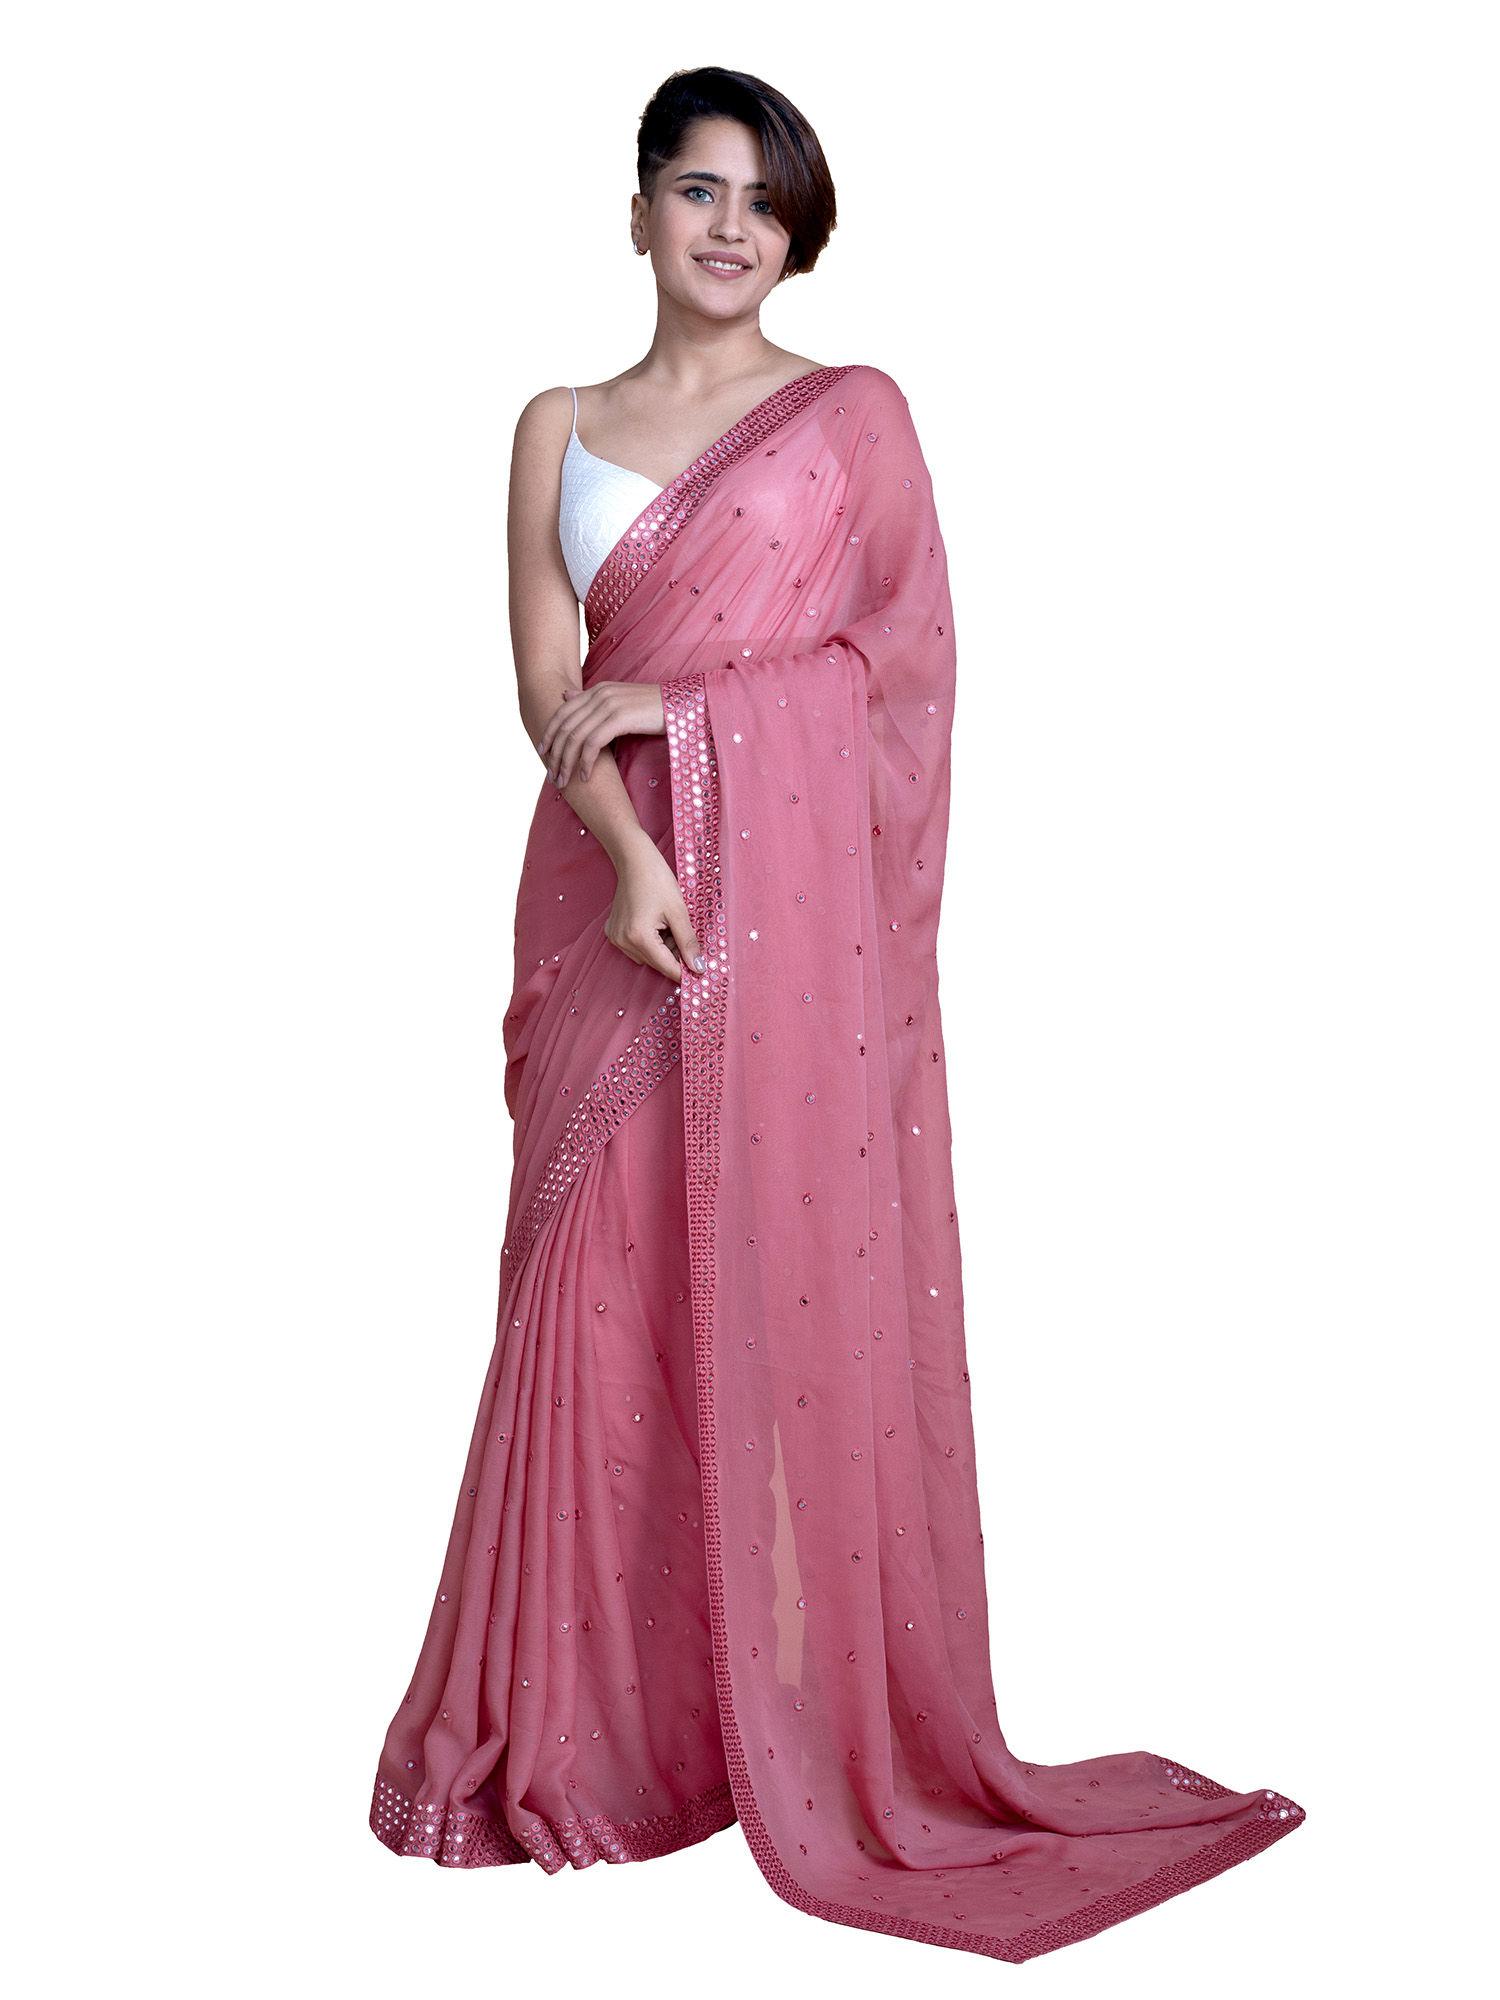 sand rose viscose foil mirror embroidered saree without blouse